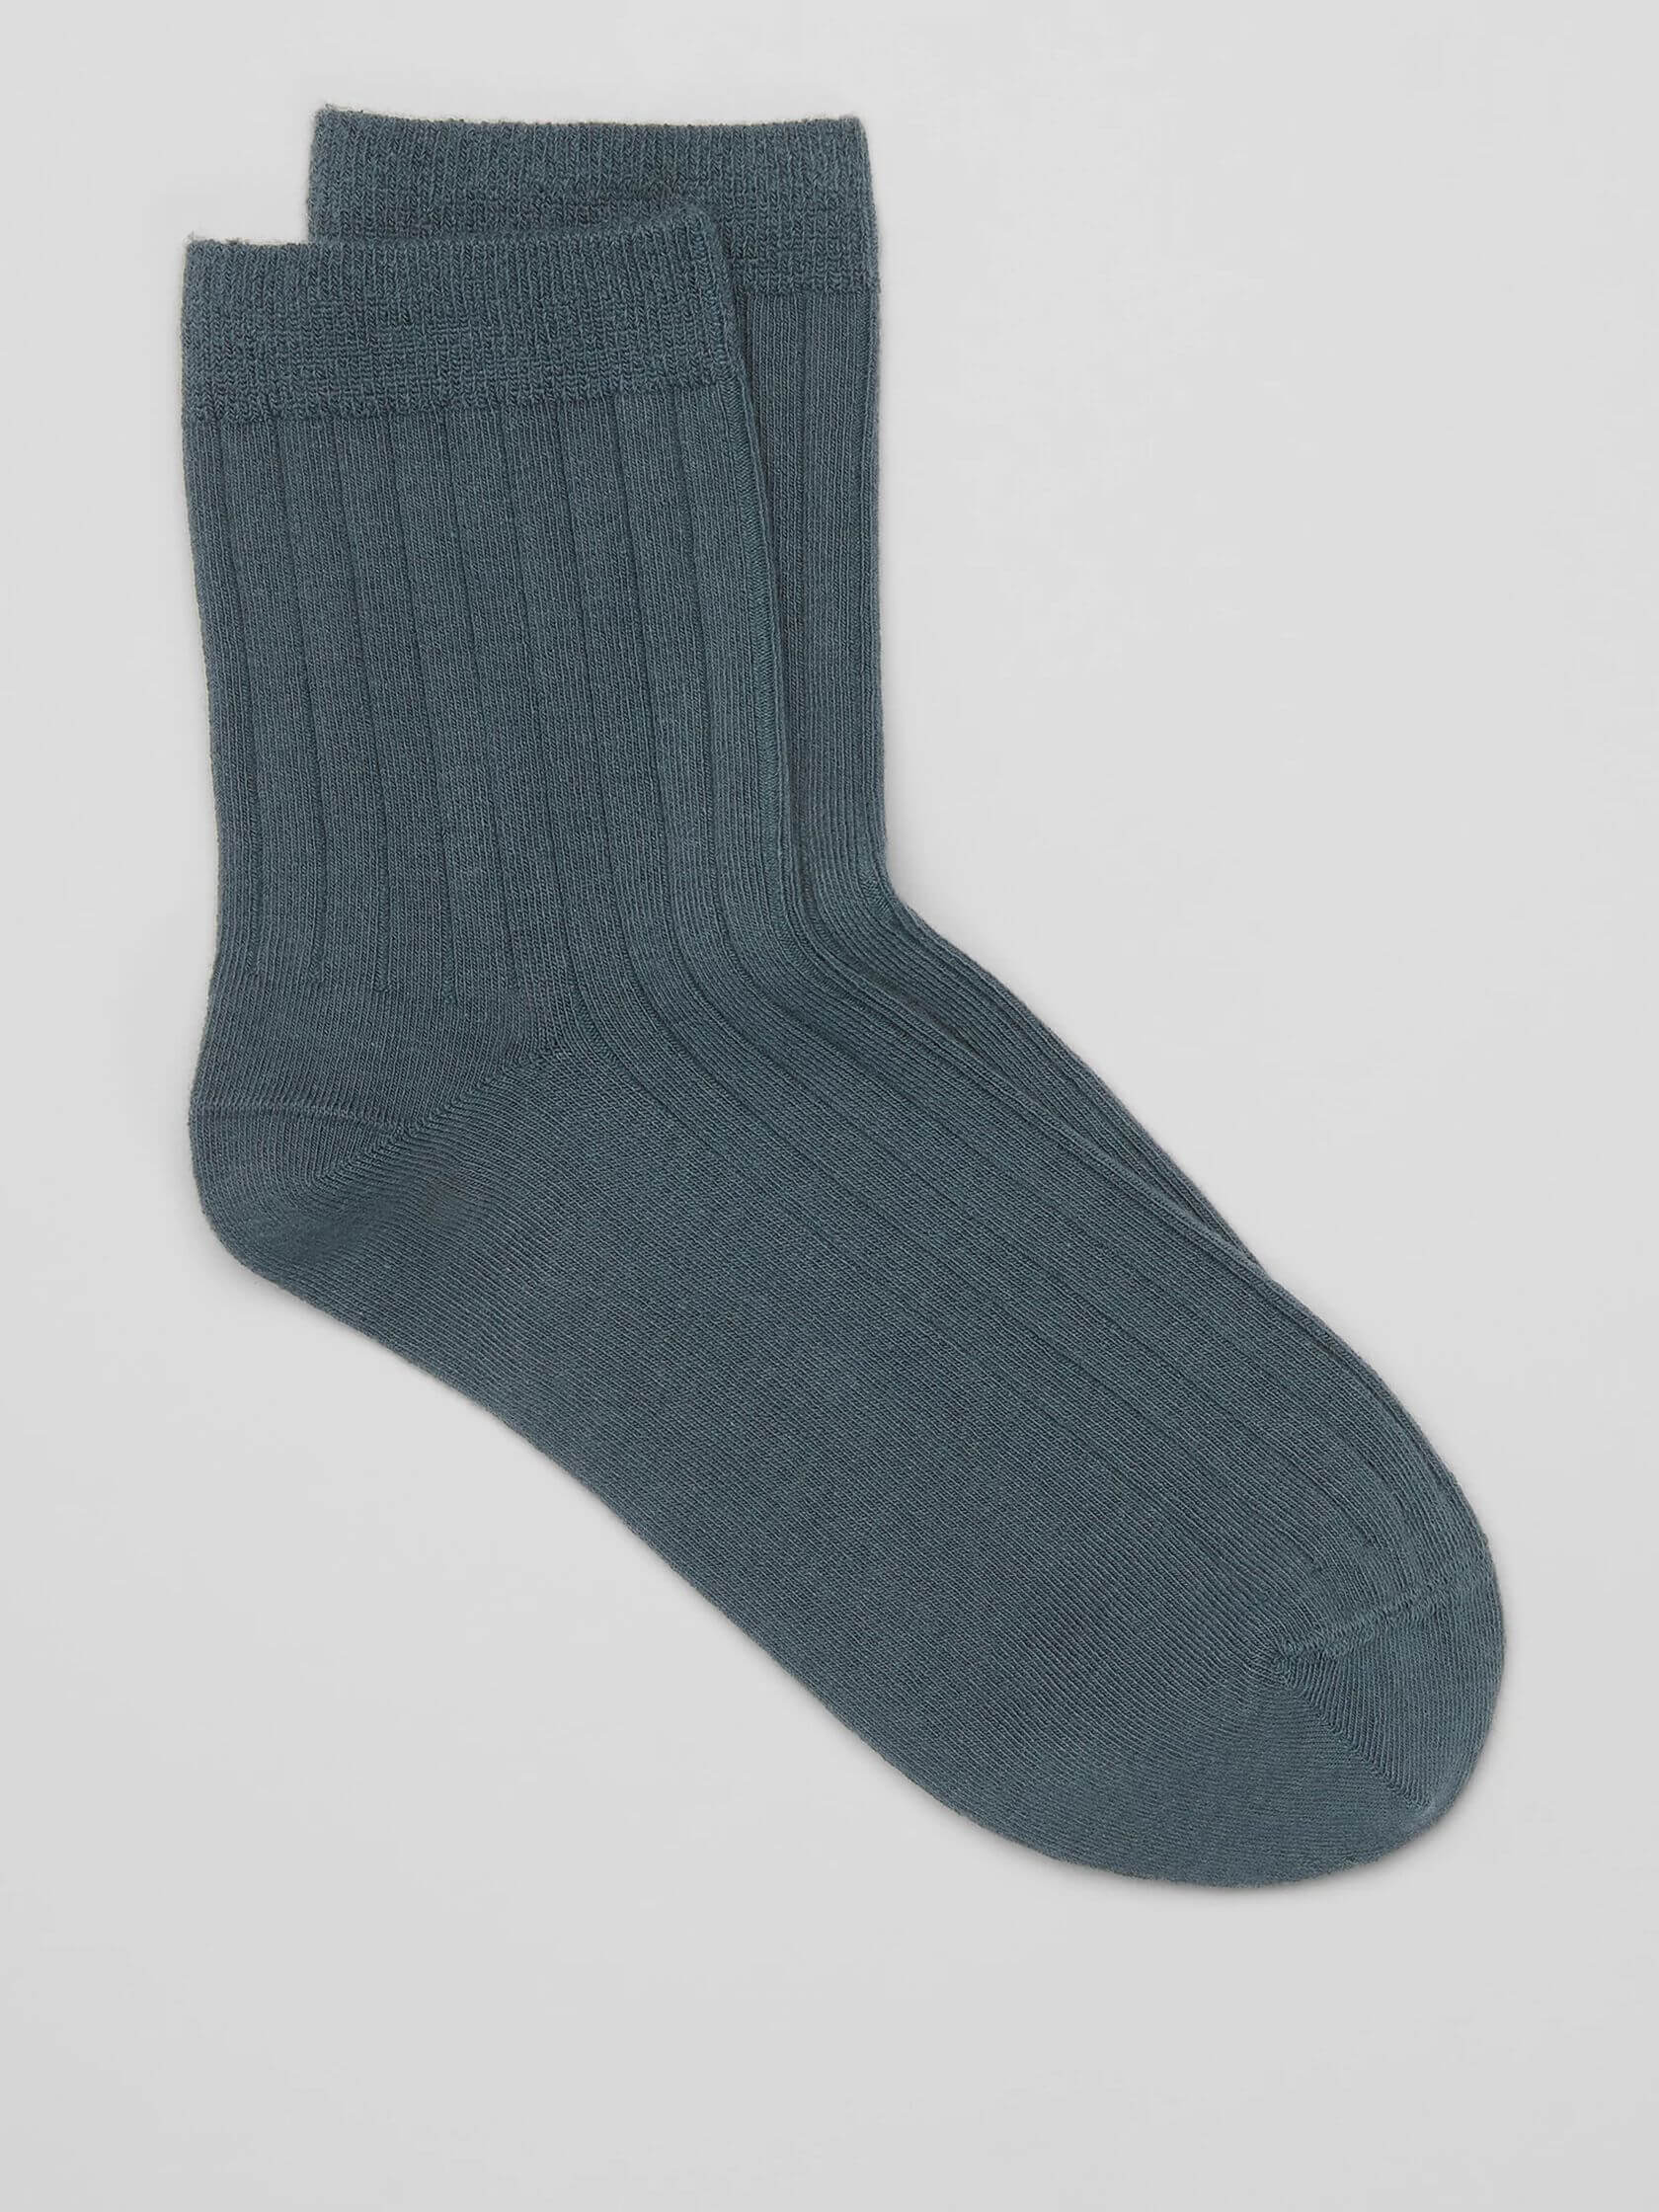 9 Brands Making Snuggly Organic Cotton & Bamboo Socks - The Good Trade